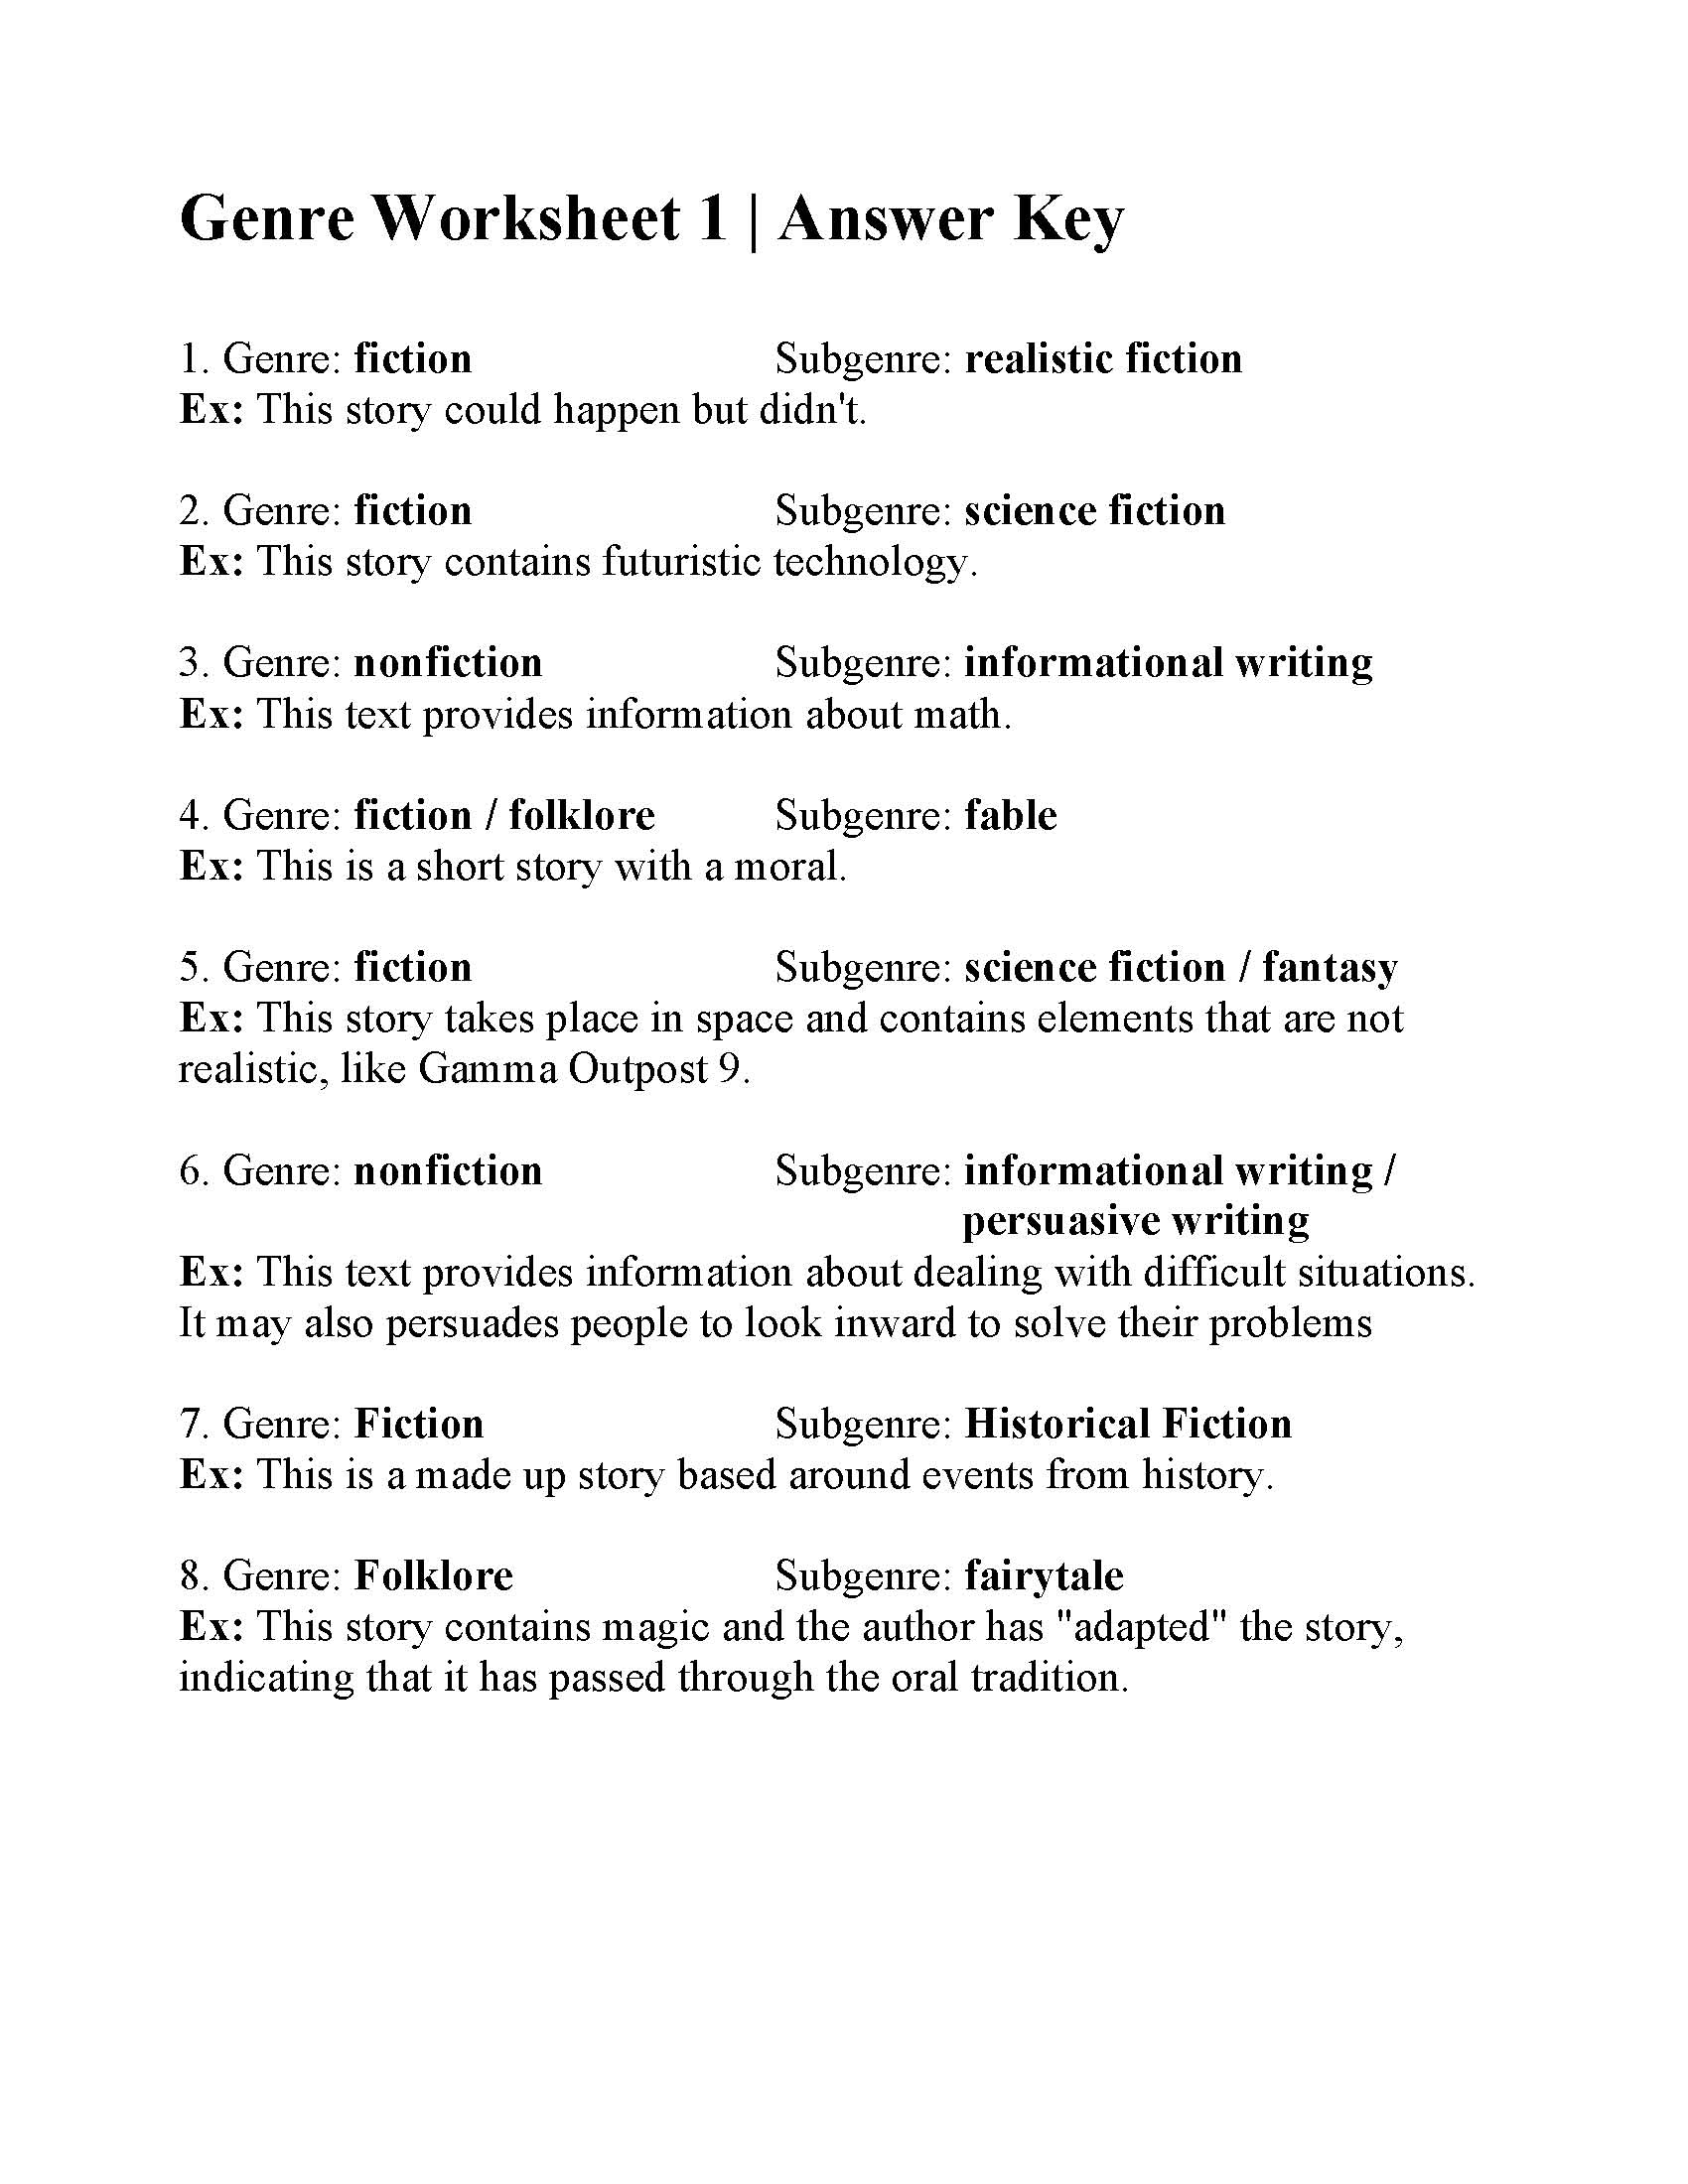 This is a preview image of Genre Worksheet 1. Click on it to enlarge it or view the source file.